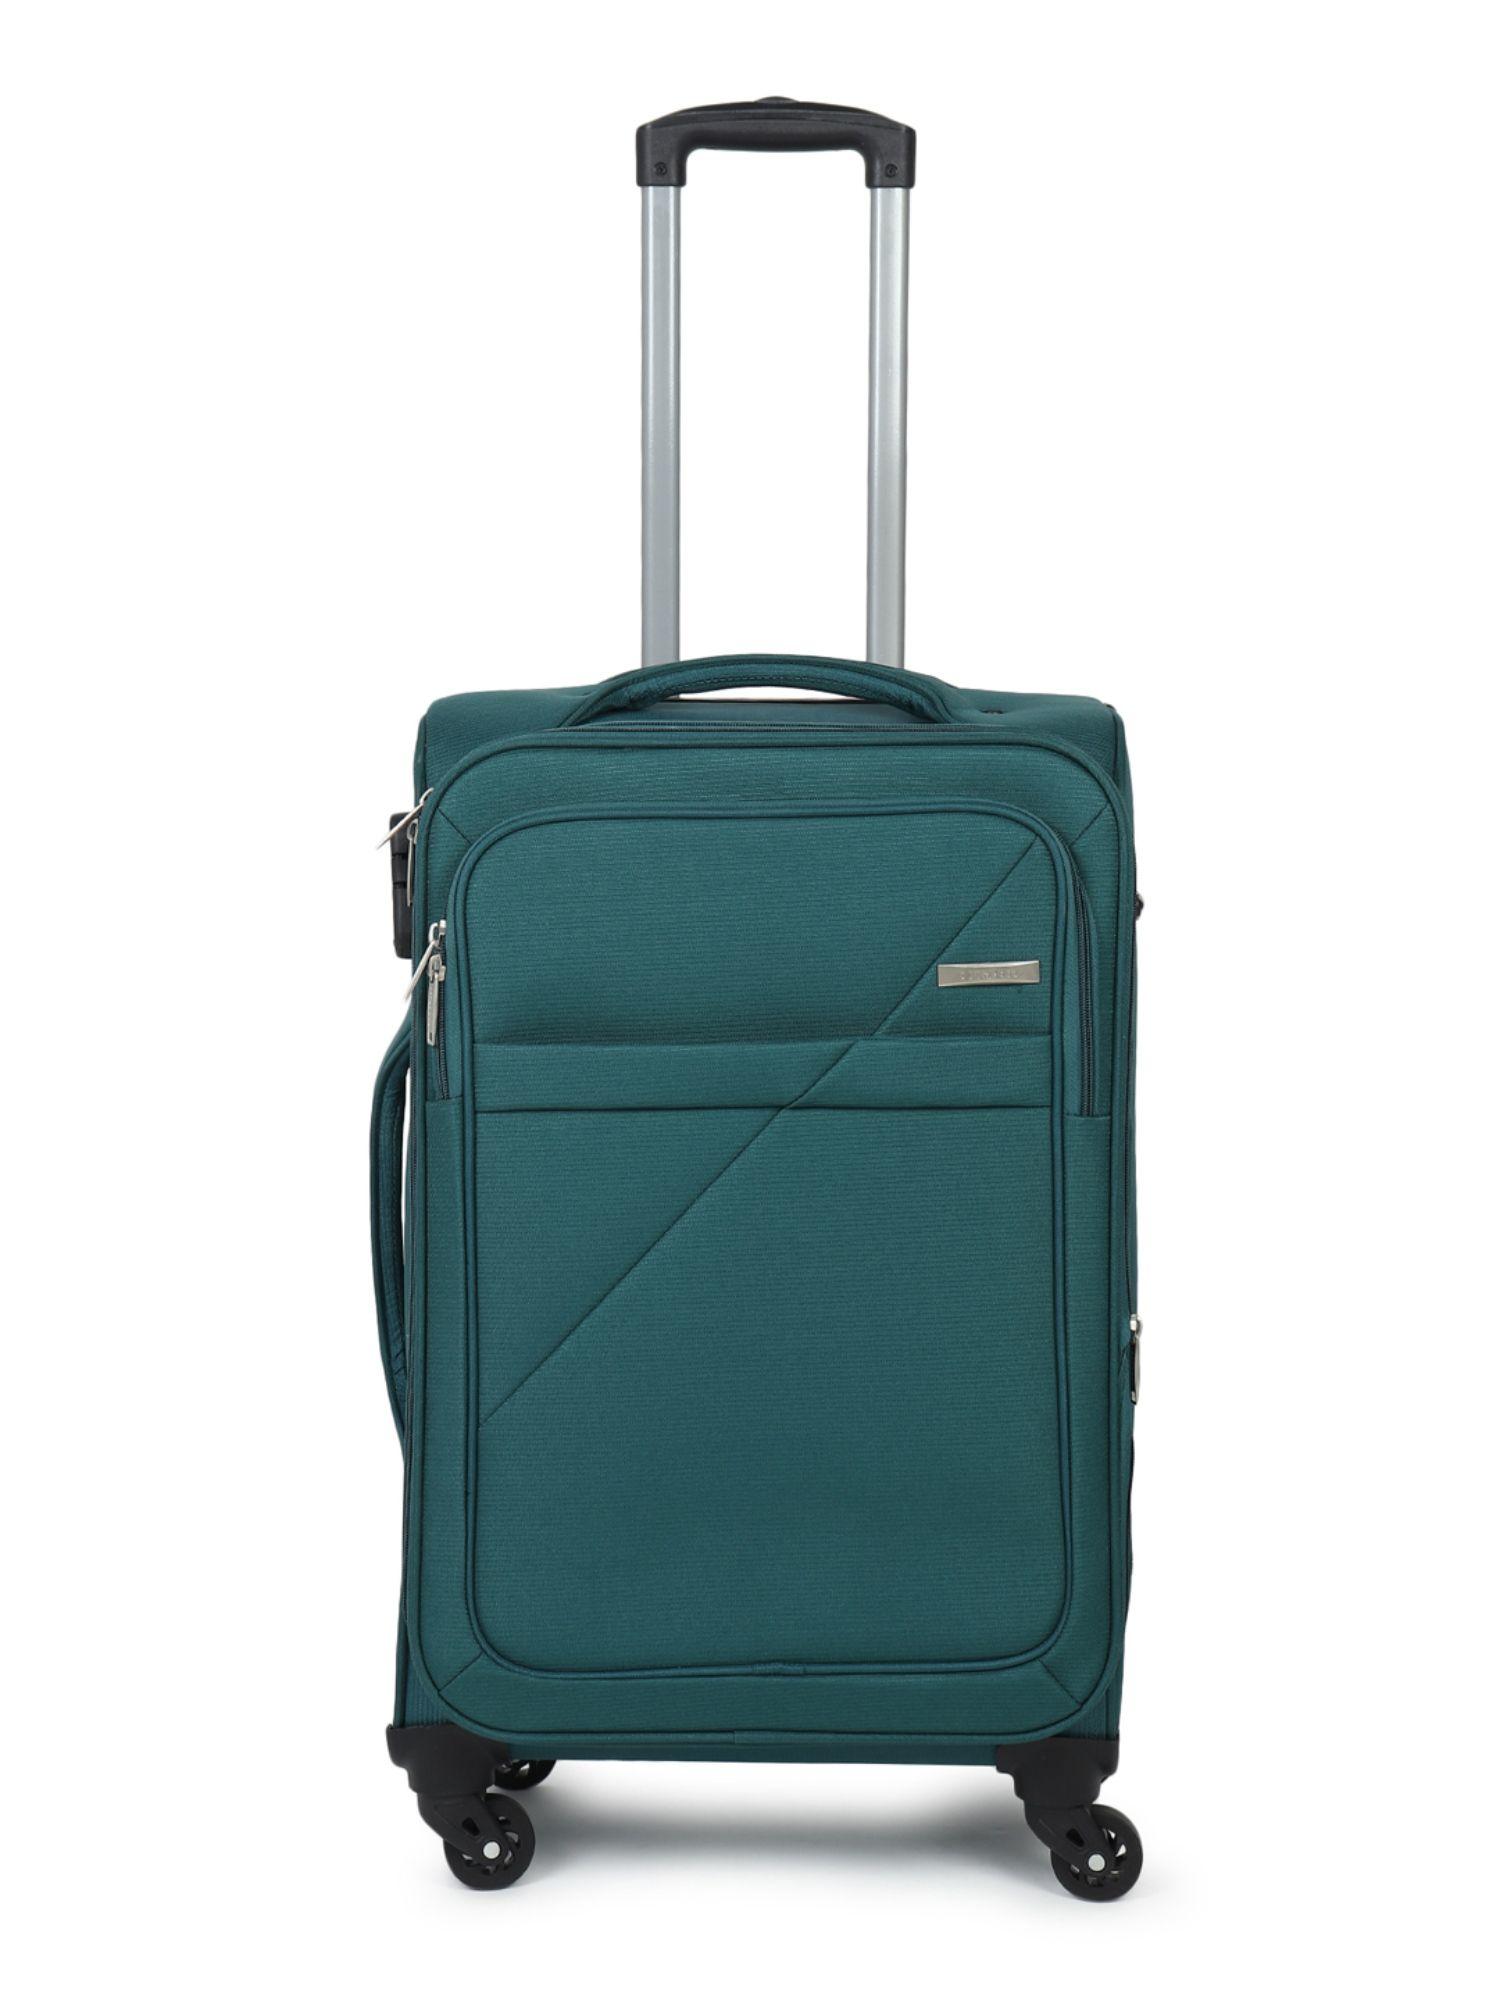 unisex teal solid soft sided medium size check-in trolley bag